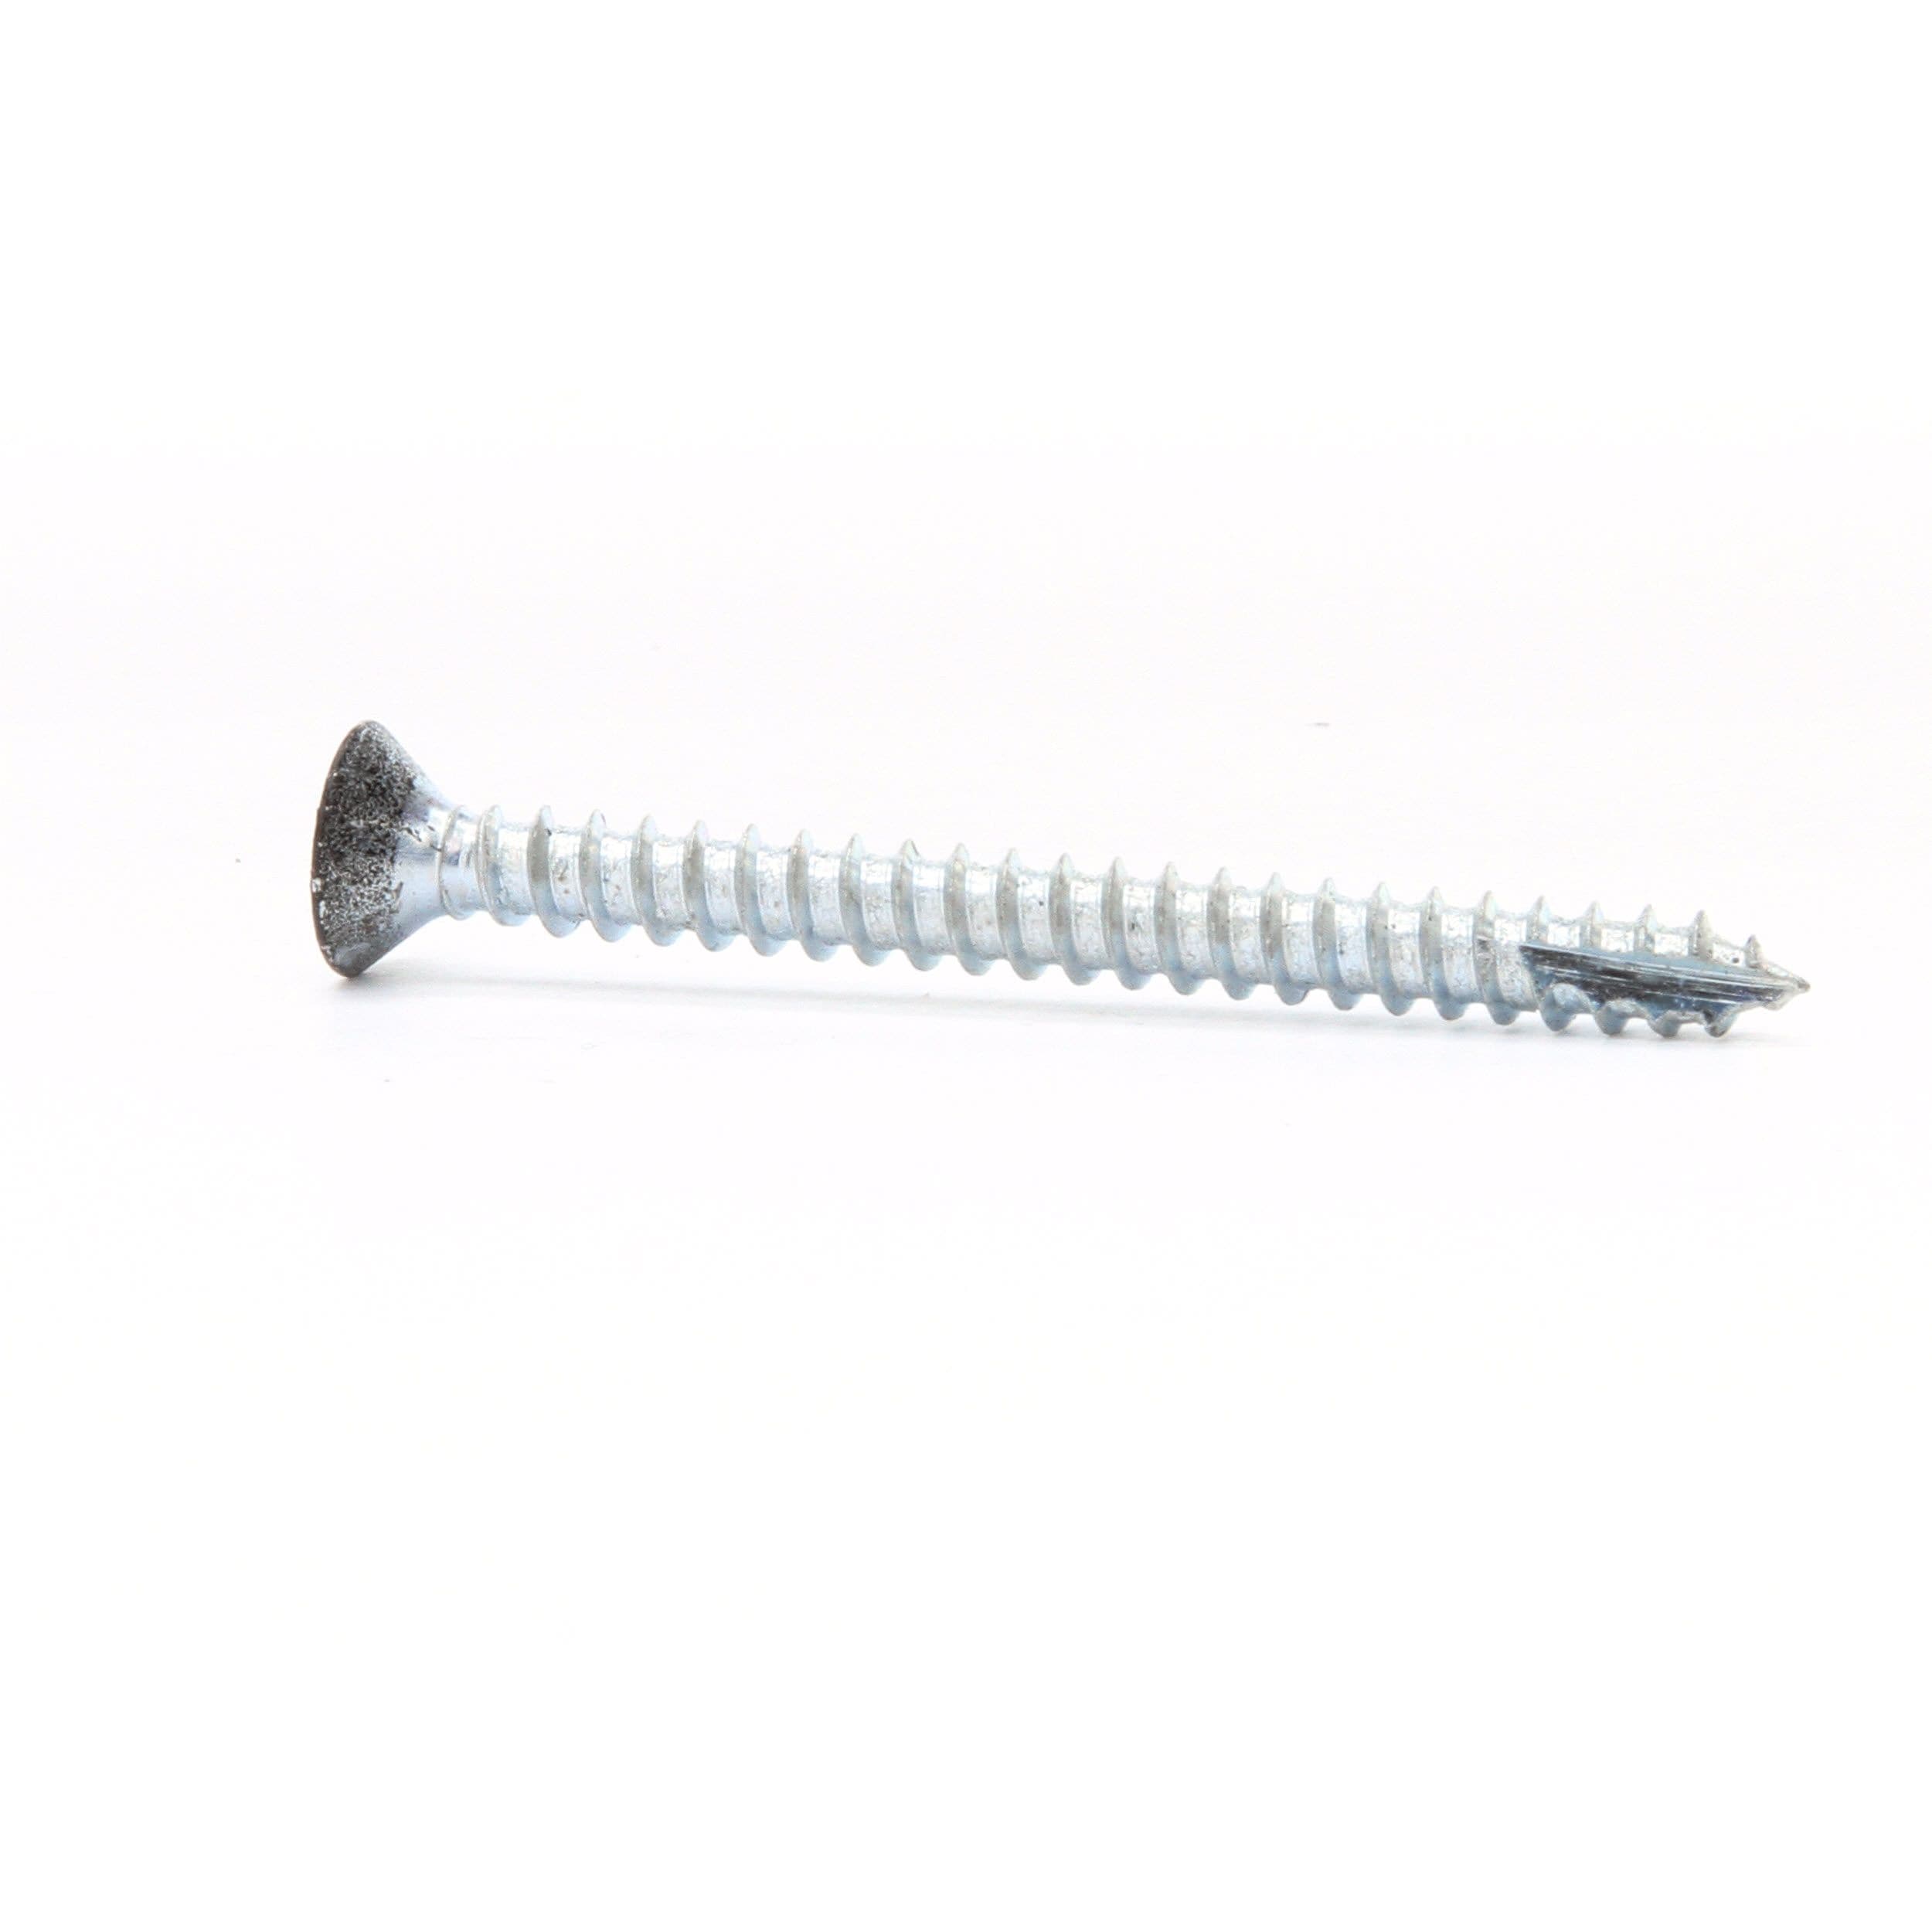 Round Head Wood Screws Slotted Drive Stainless Steel 500 Pcs Quality Metal Fast Stainless Steel Wood Screws #8 x 1-3/4